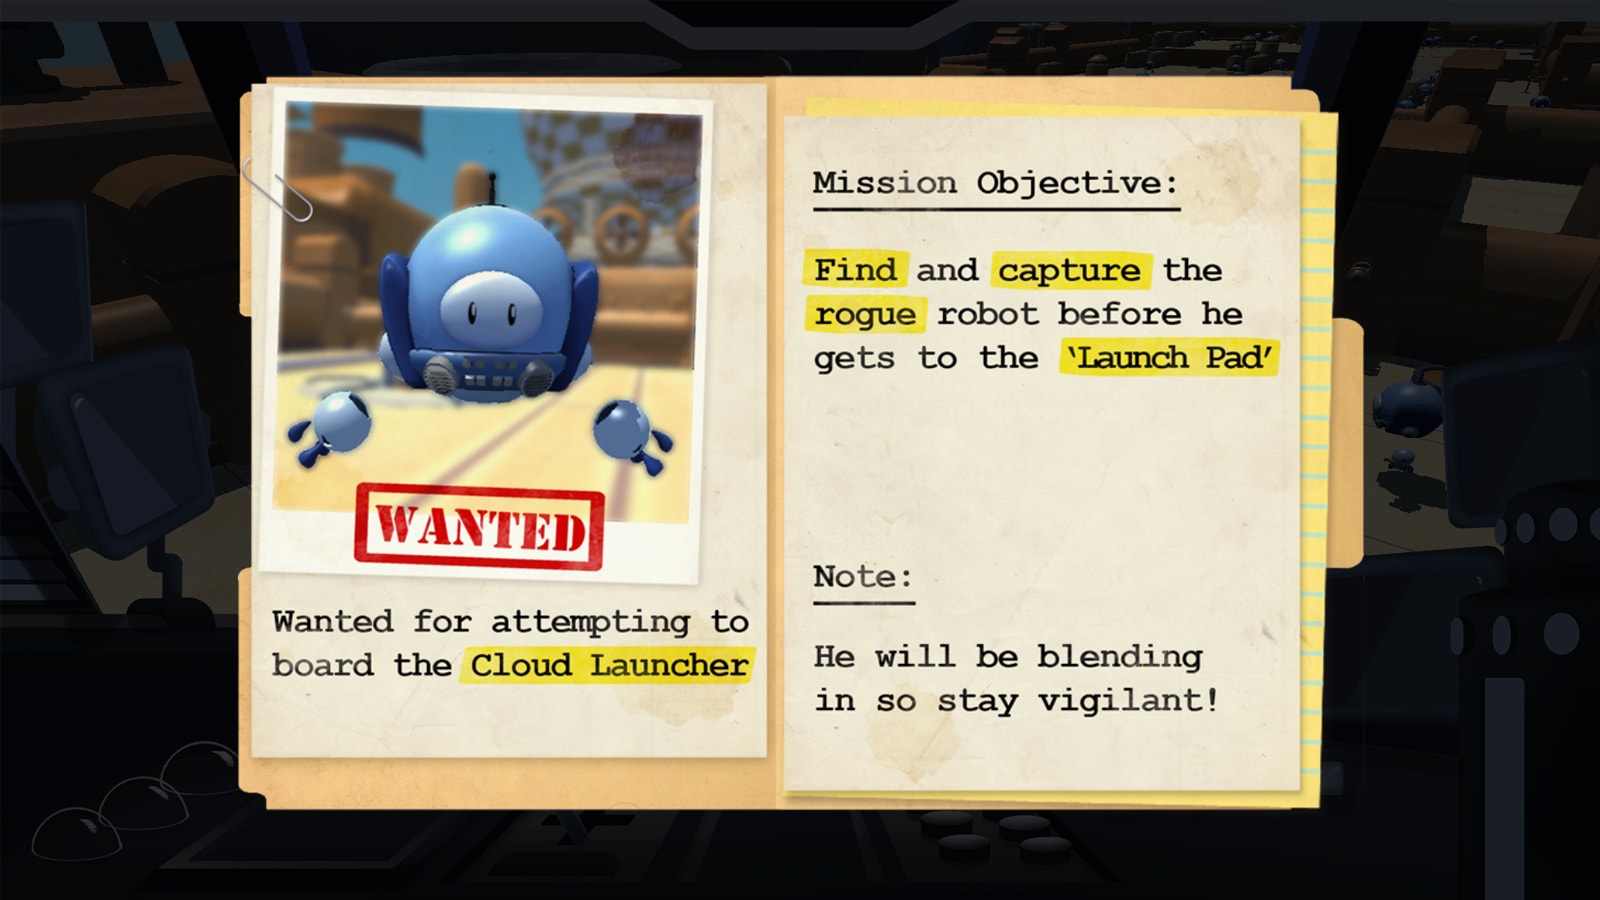 A folder containing a paper-clipped photo of a blue robot with the word "WANTED" stamped in red below it.